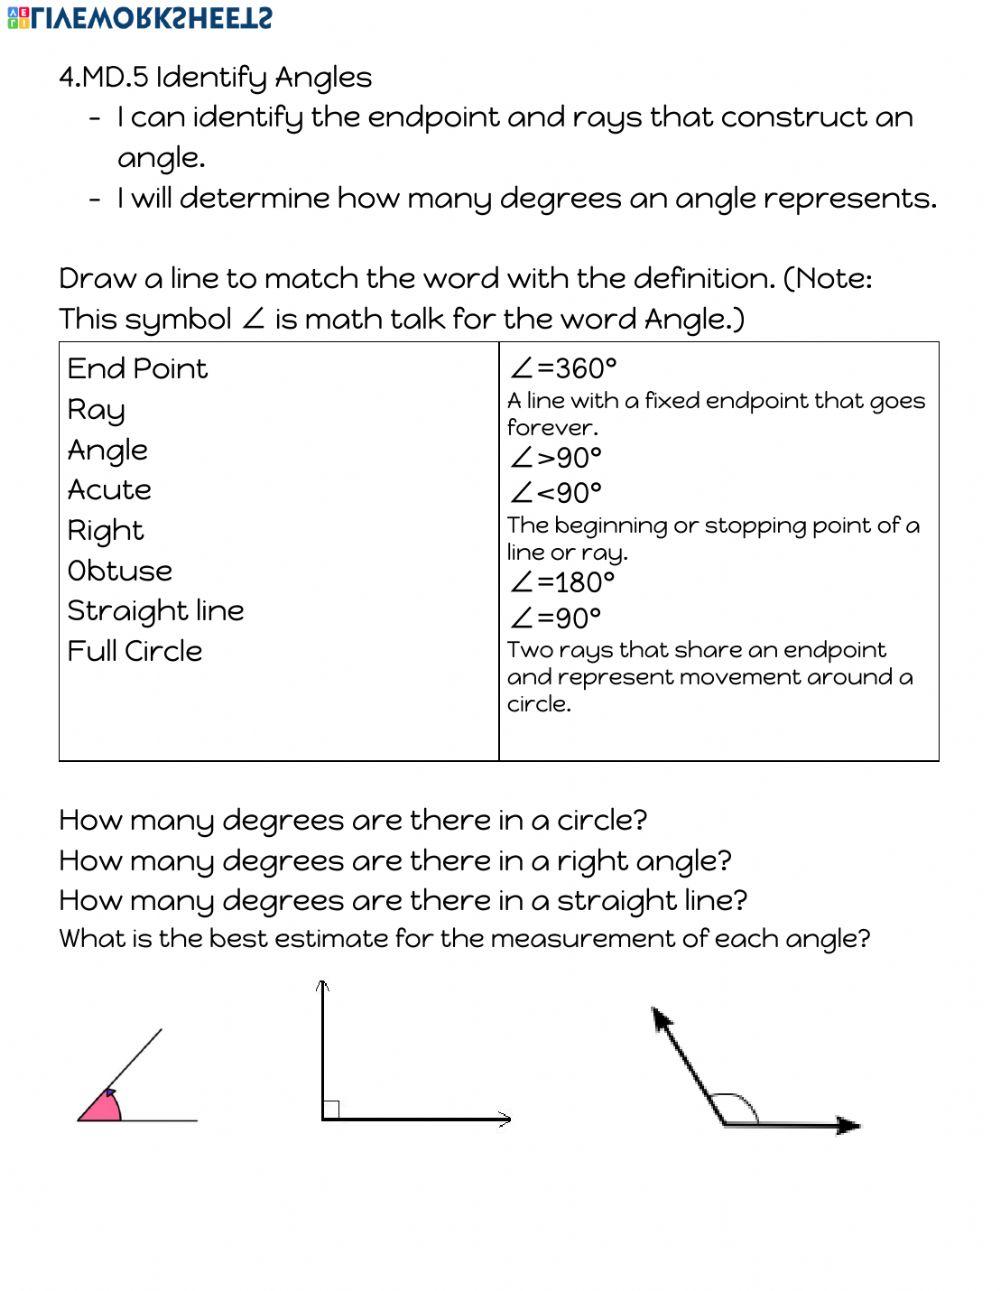 4.MD.5 Identifying angles